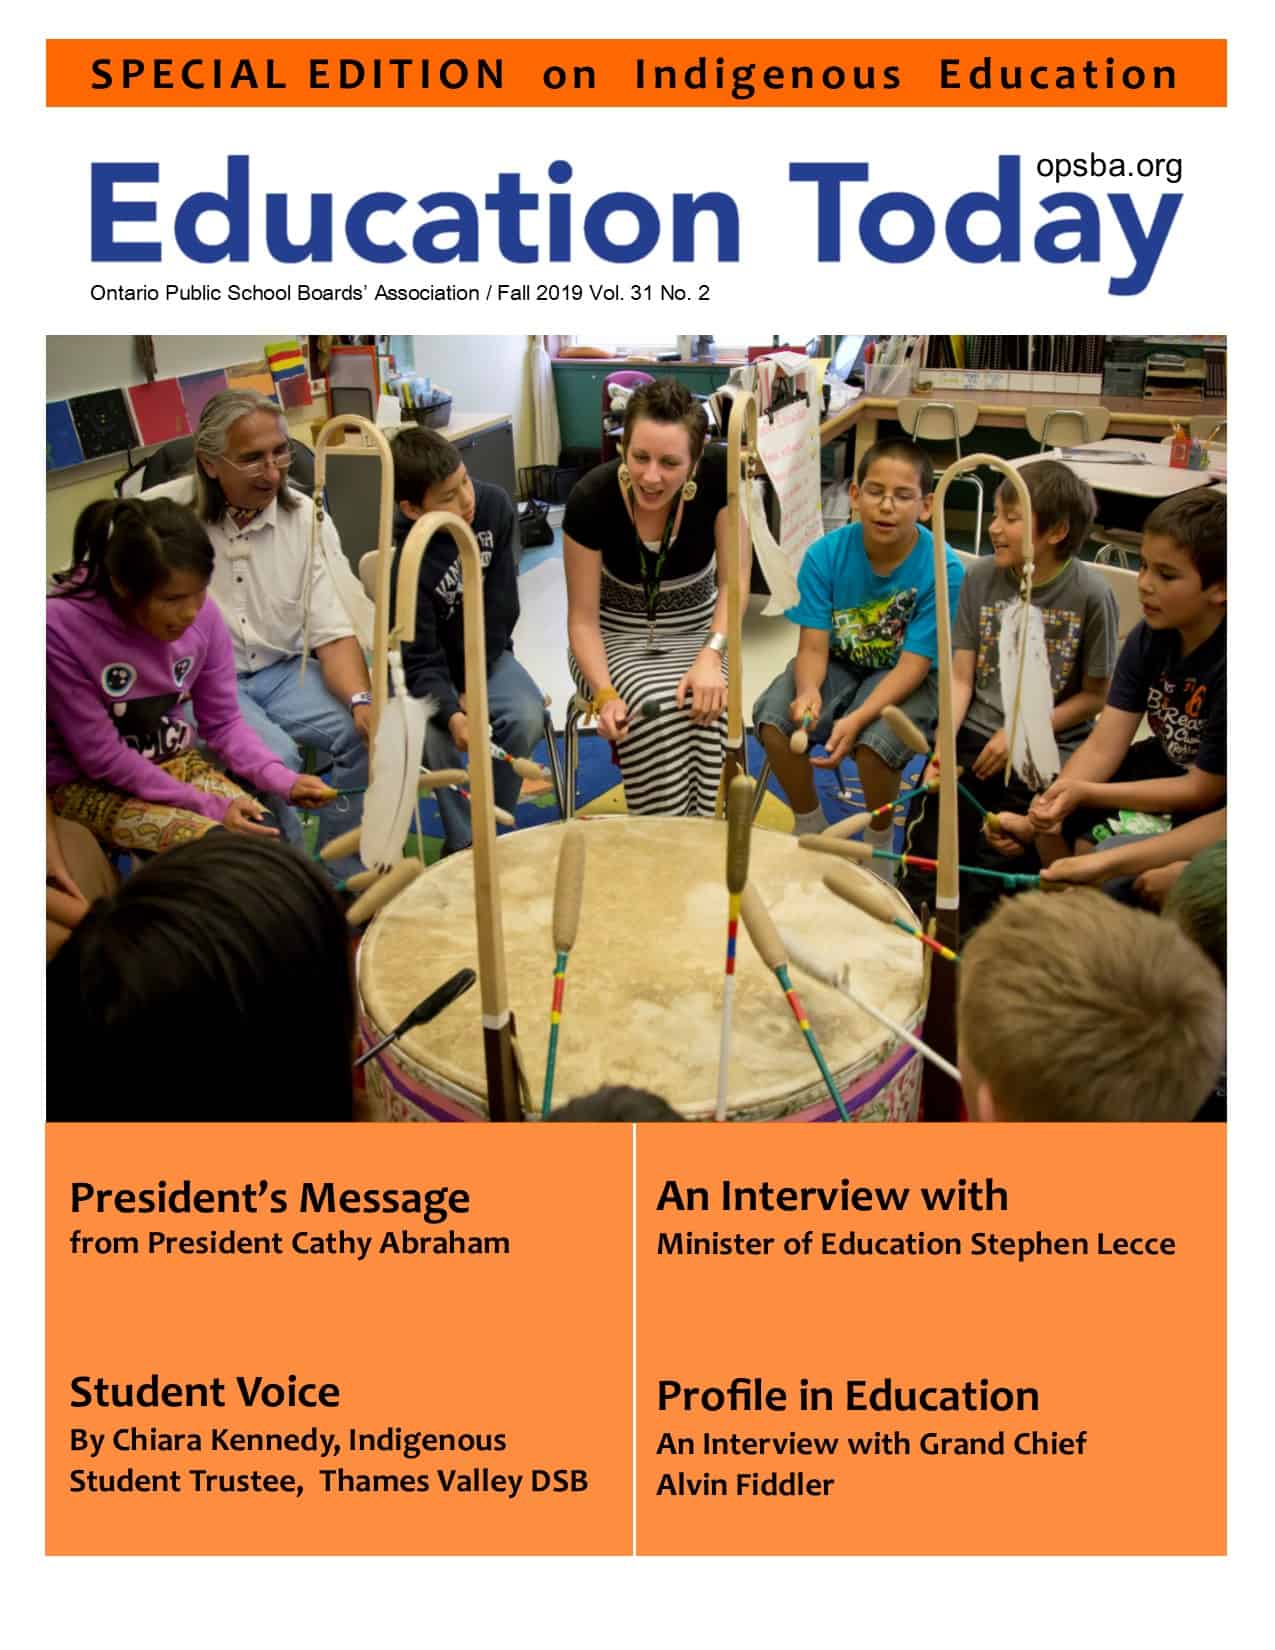 Education Today | Fall 2019 | Volume 31 Number 2